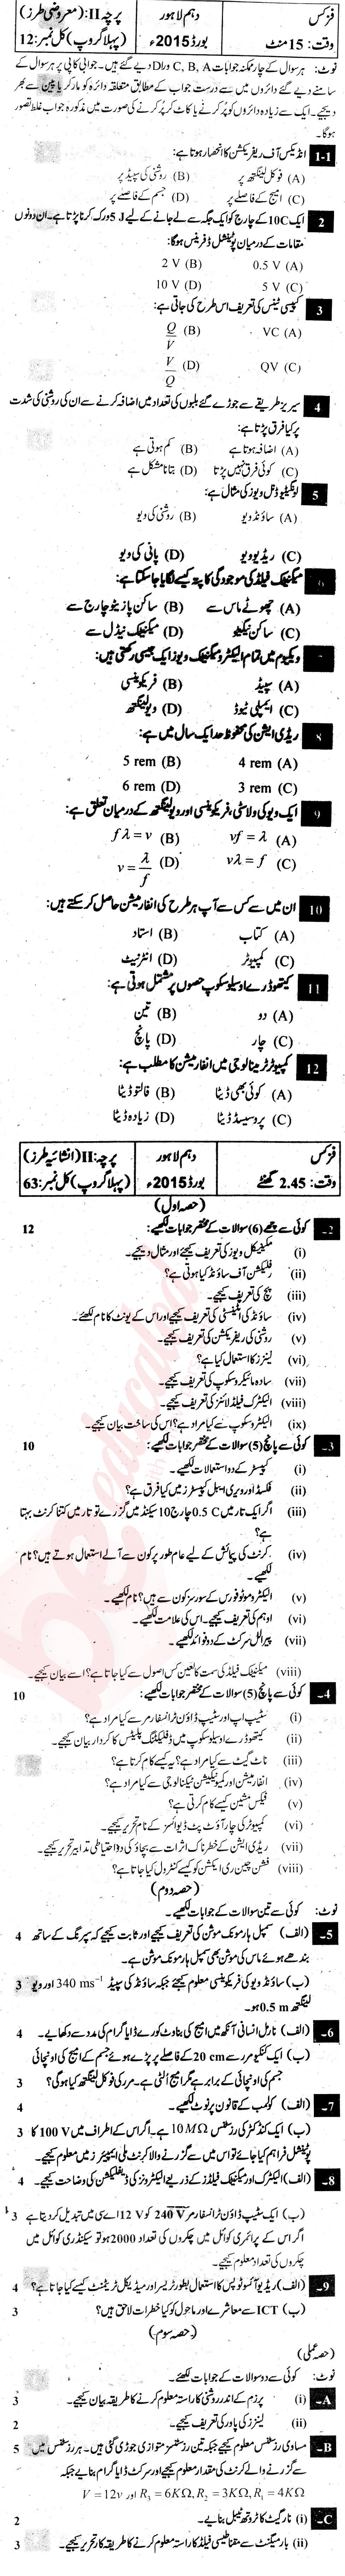 Physics 10th class Past Paper Group 1 BISE Lahore 2015